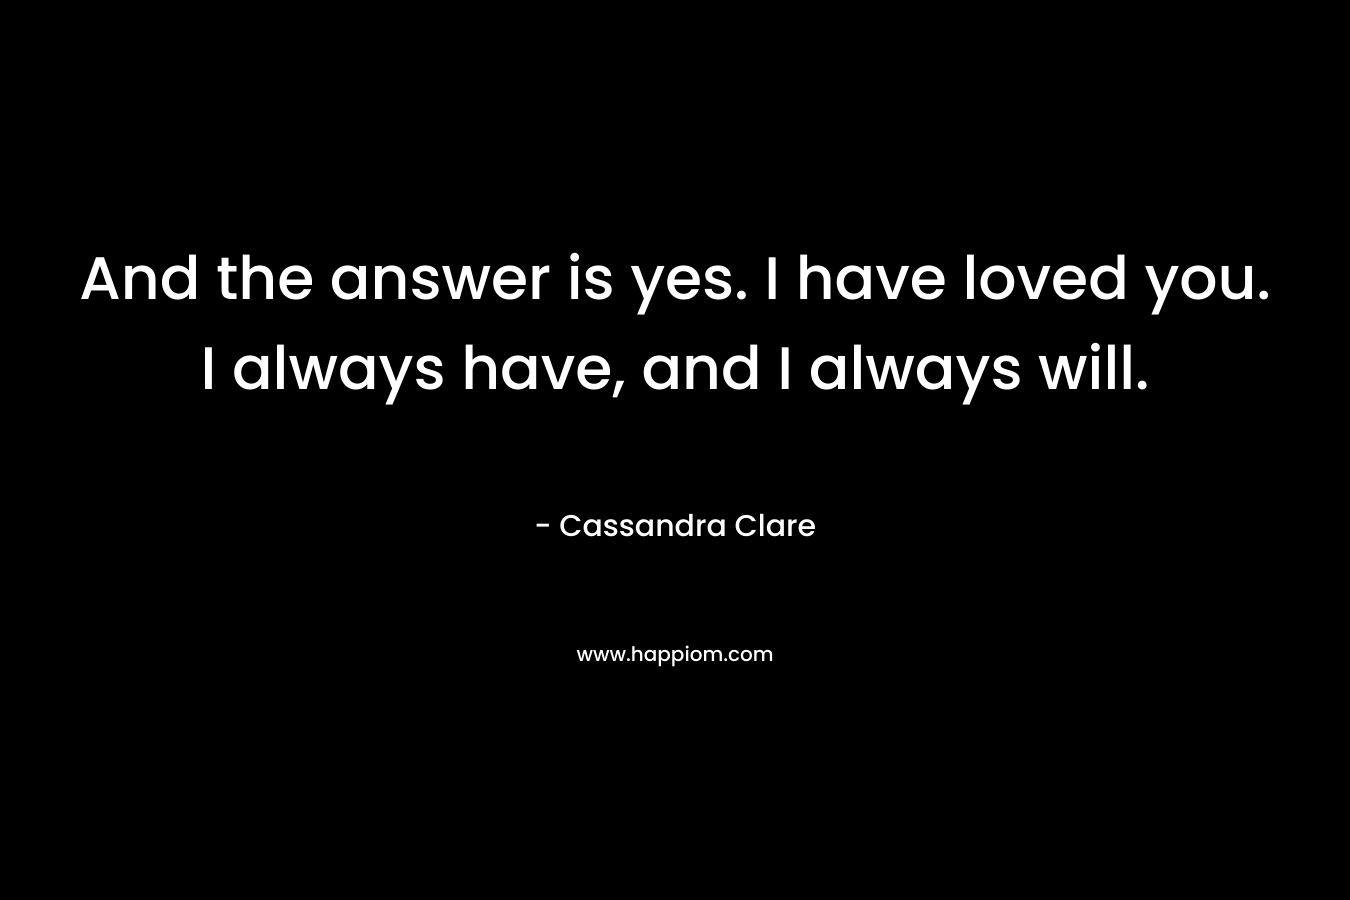 And the answer is yes. I have loved you. I always have, and I always will. – Cassandra Clare